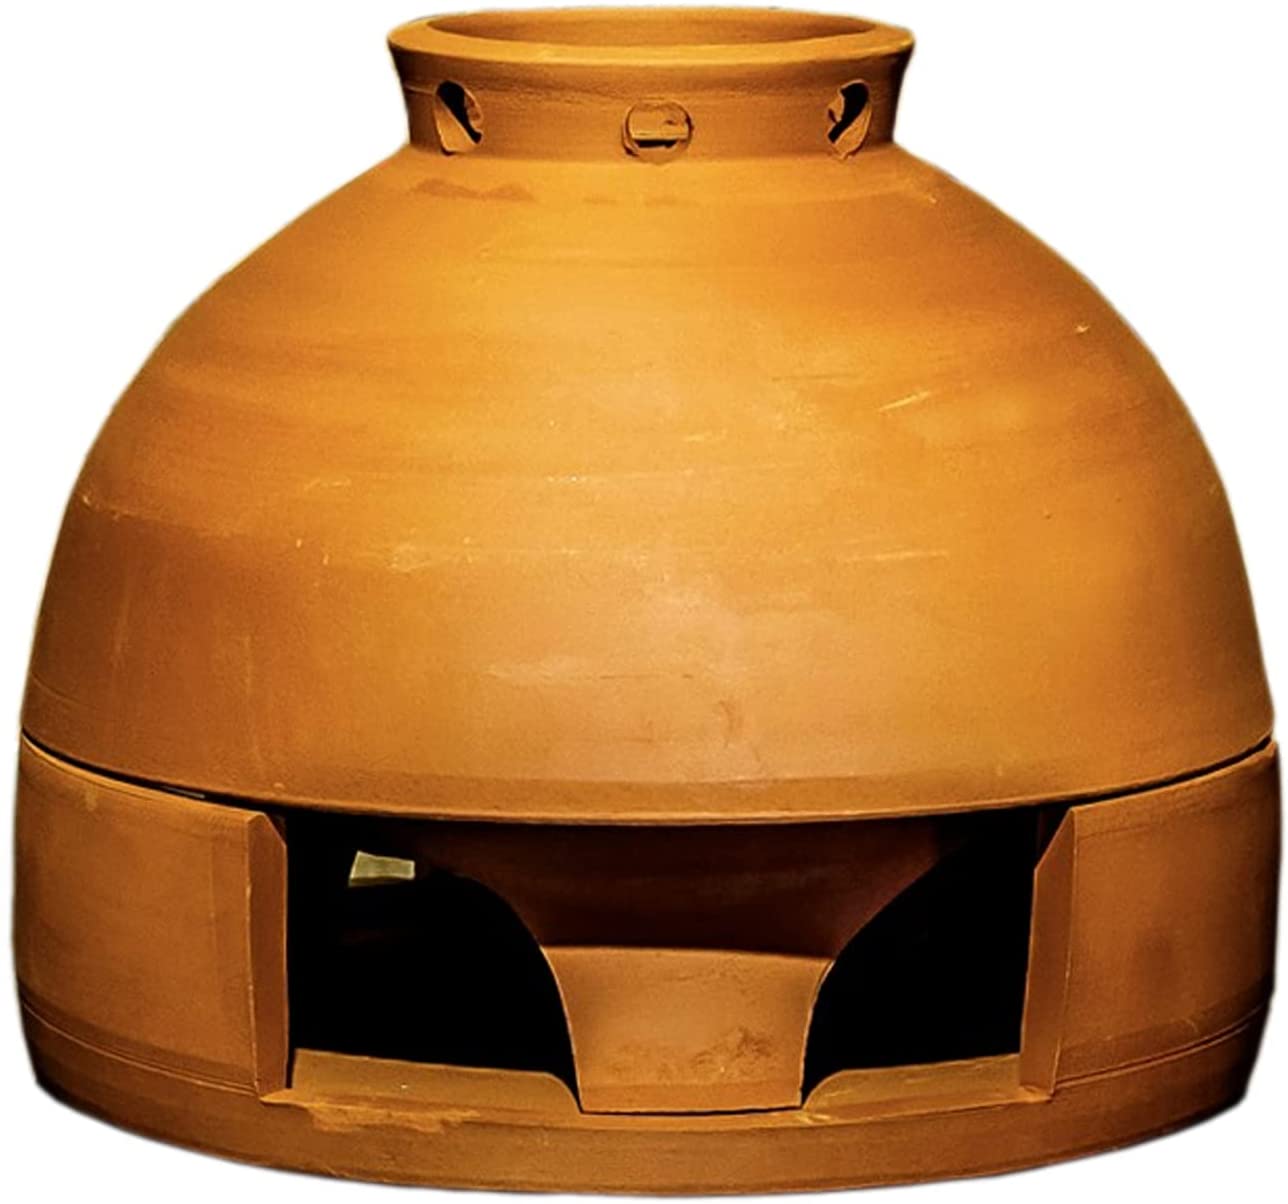 The Myth of Clay Pot Heaters - Do They Work?